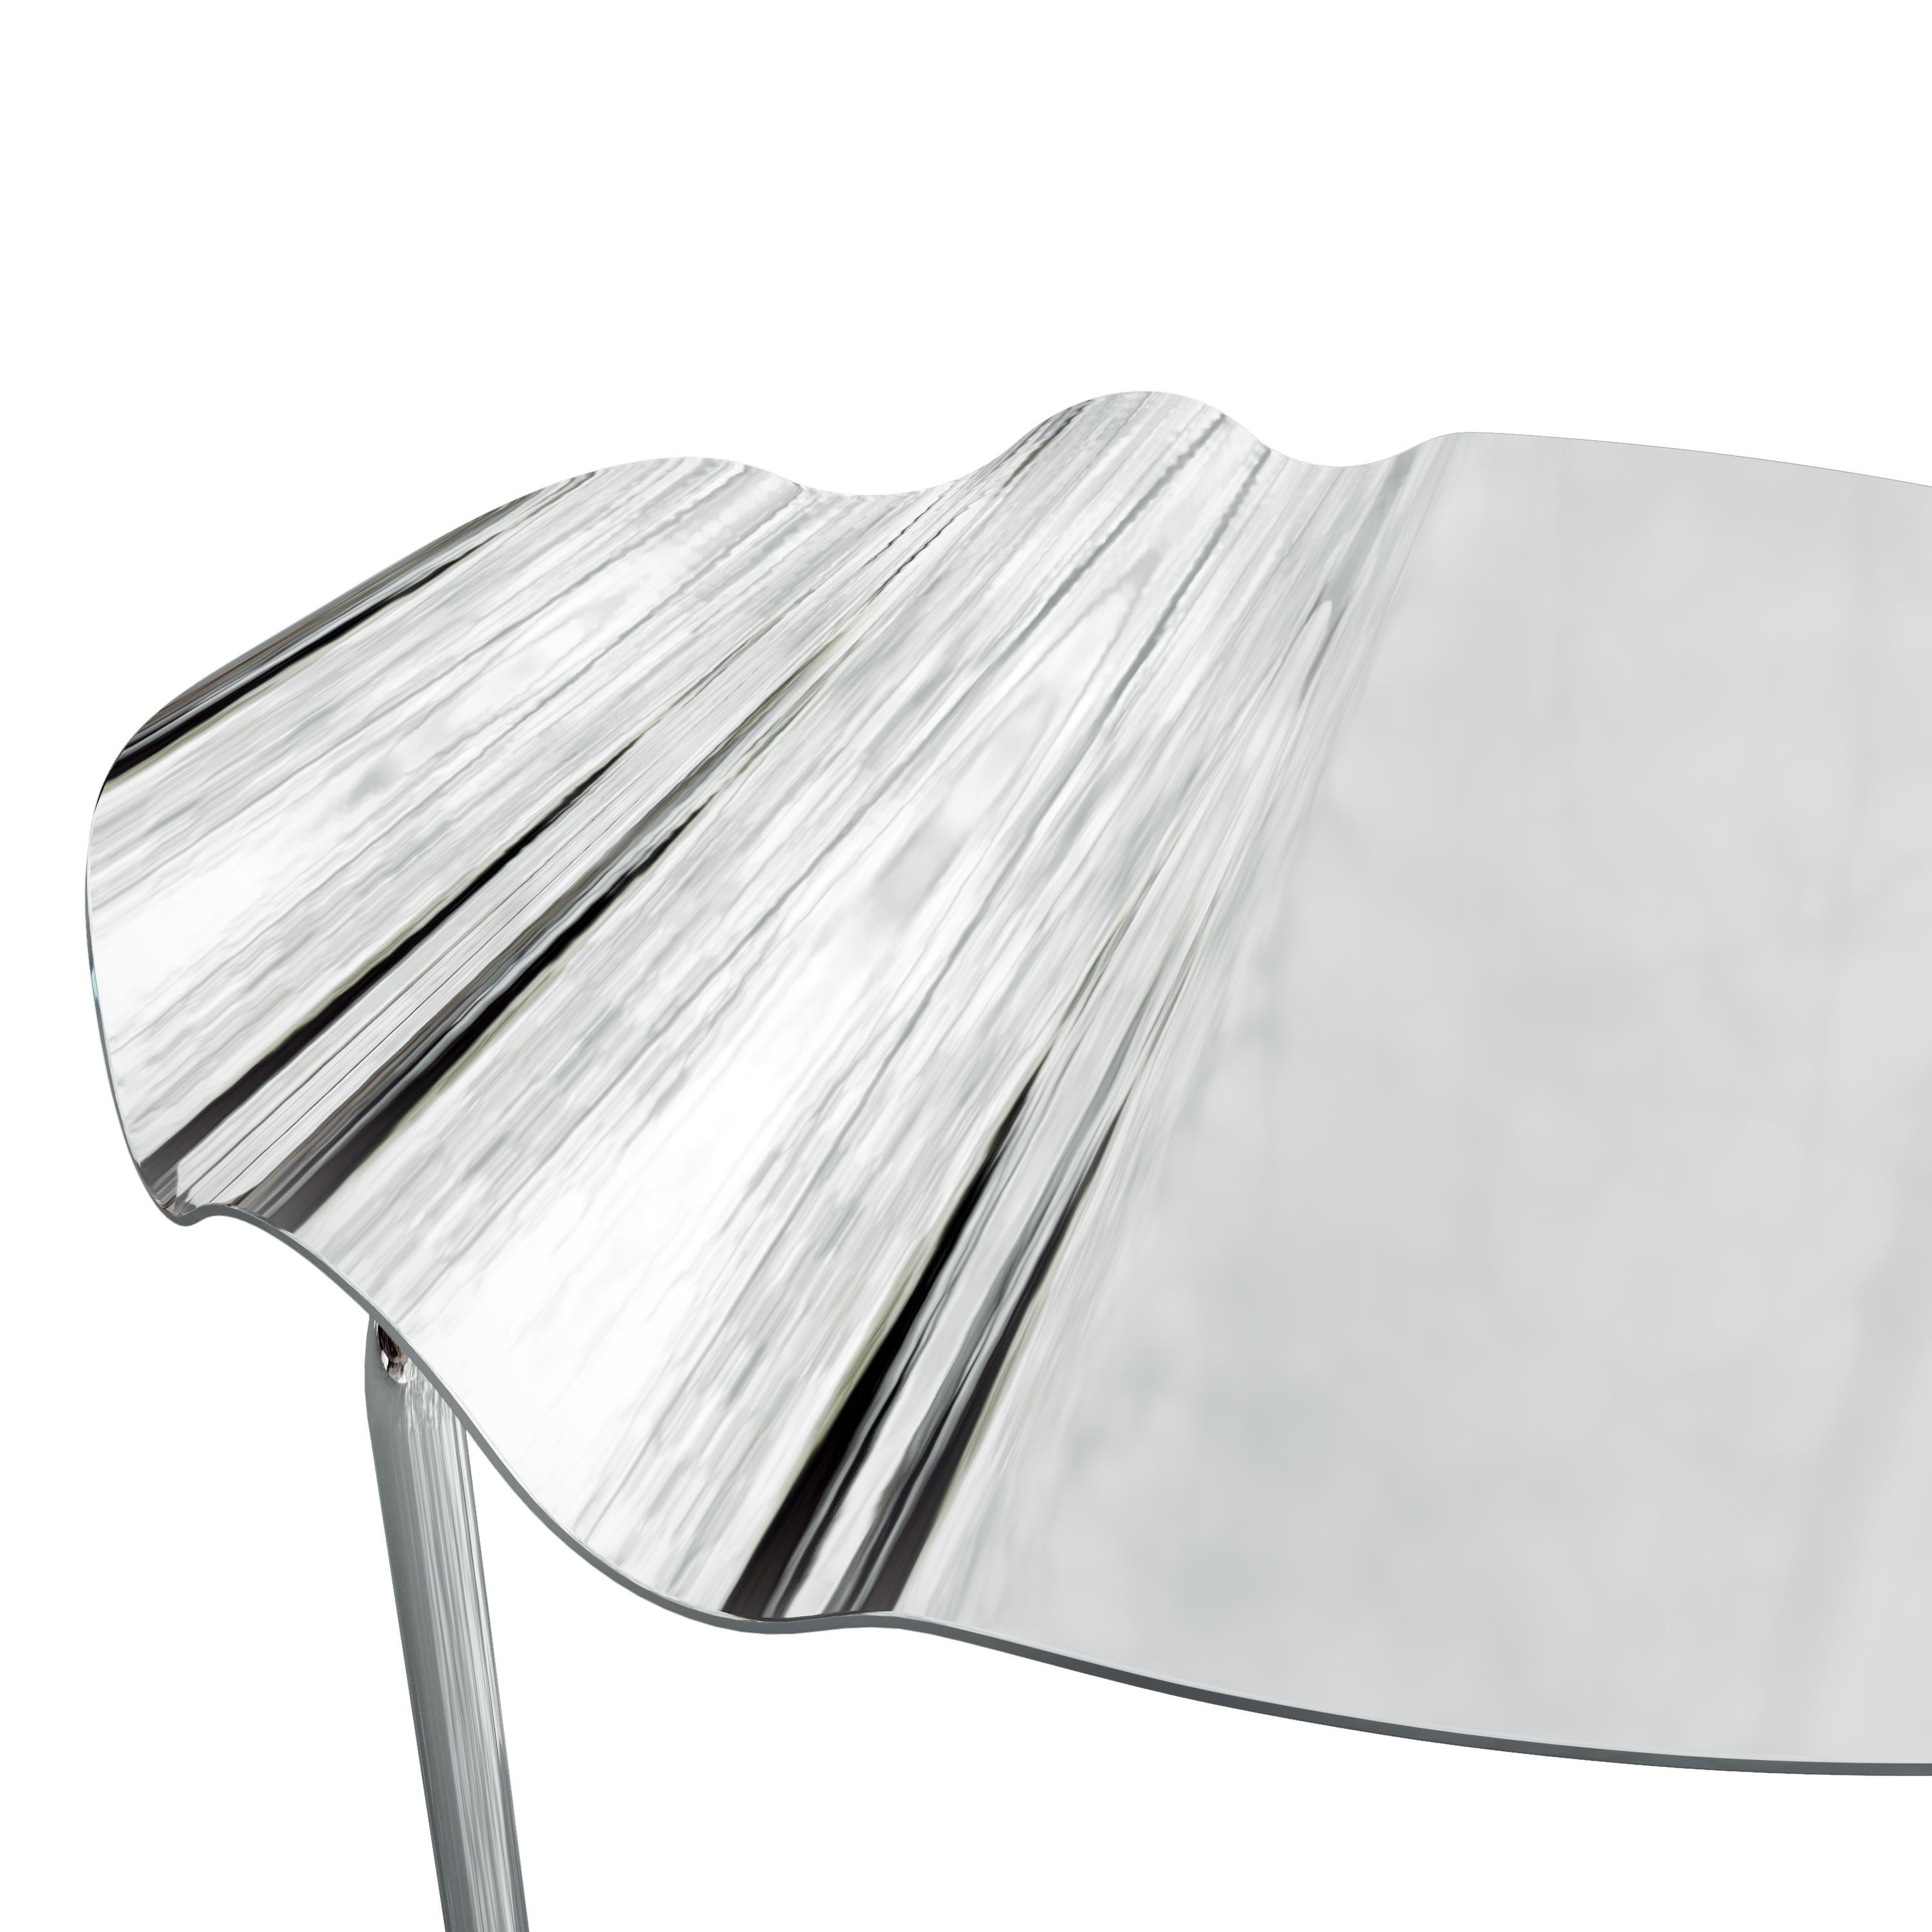 Set of Three Modern Low Tables Mount Made of Stainless Steel by DALI HOME For Sale 8